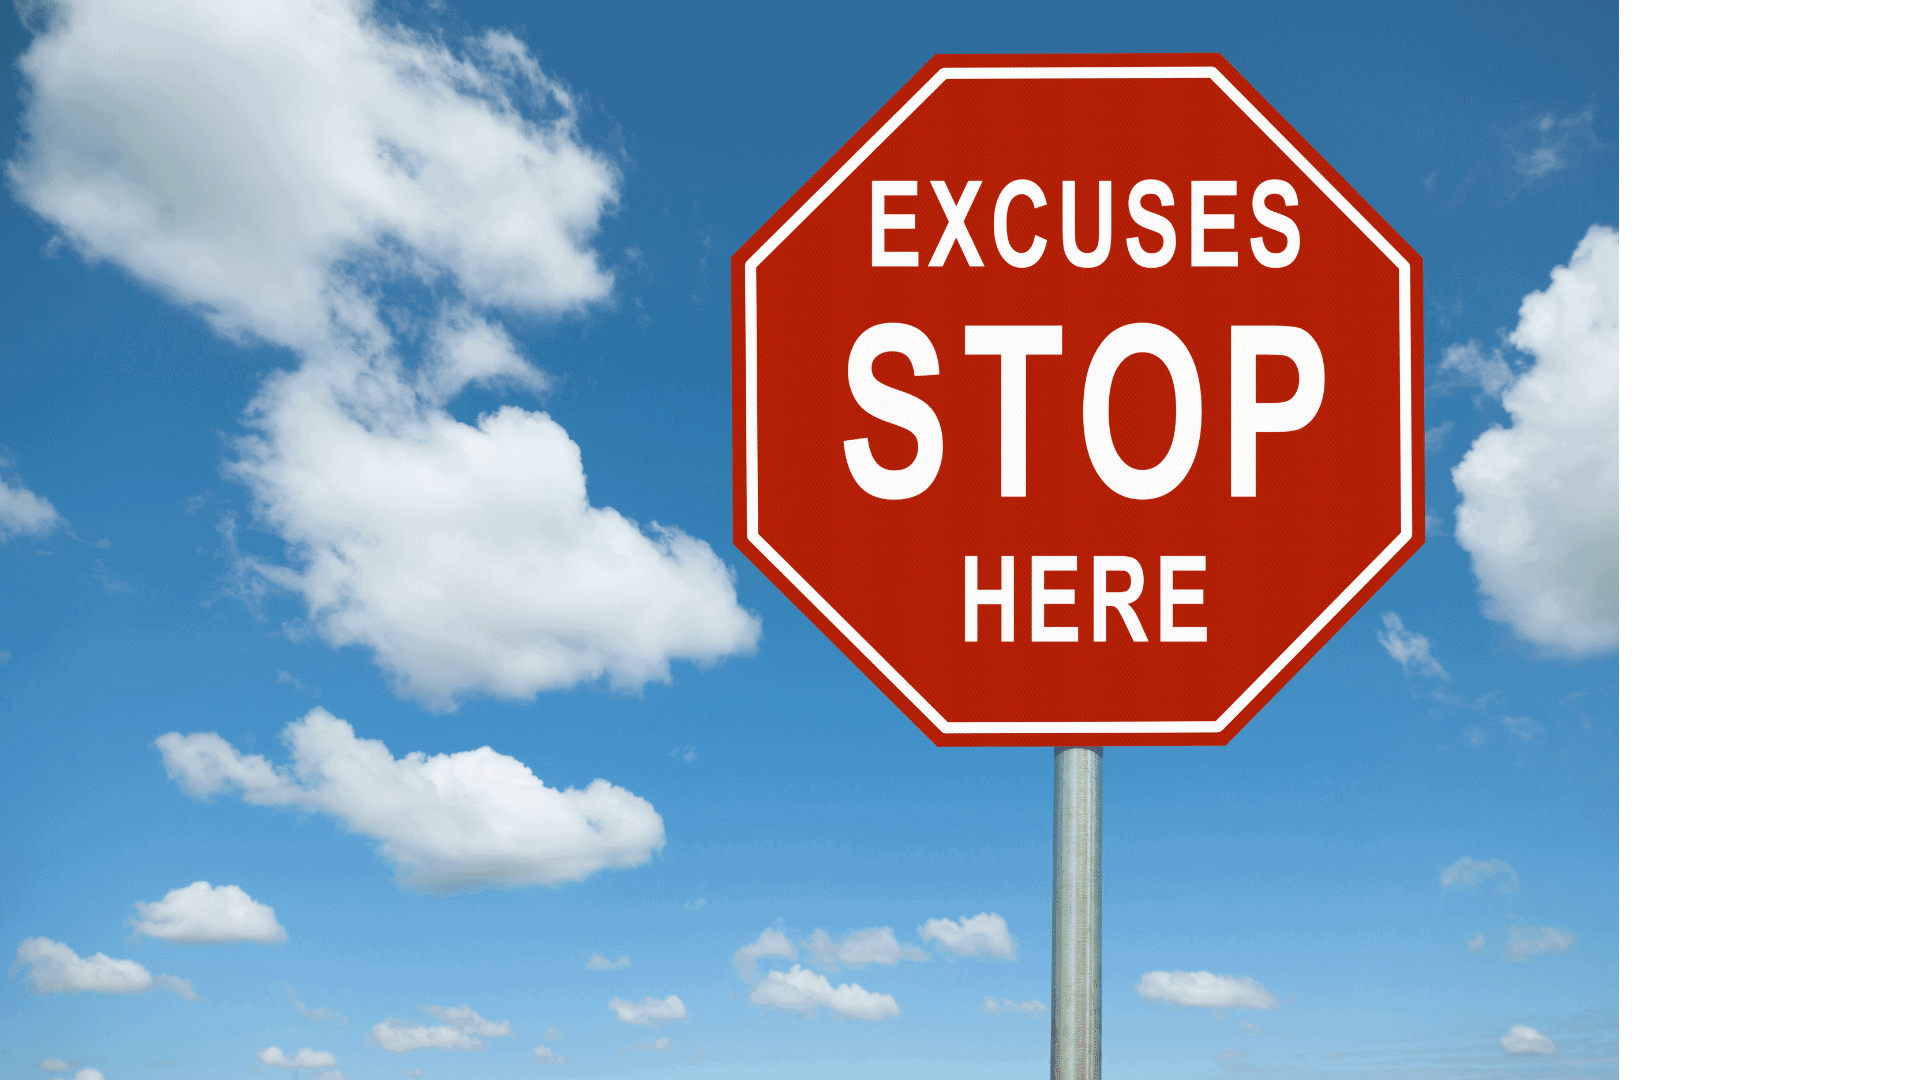 Excuses Stop Here